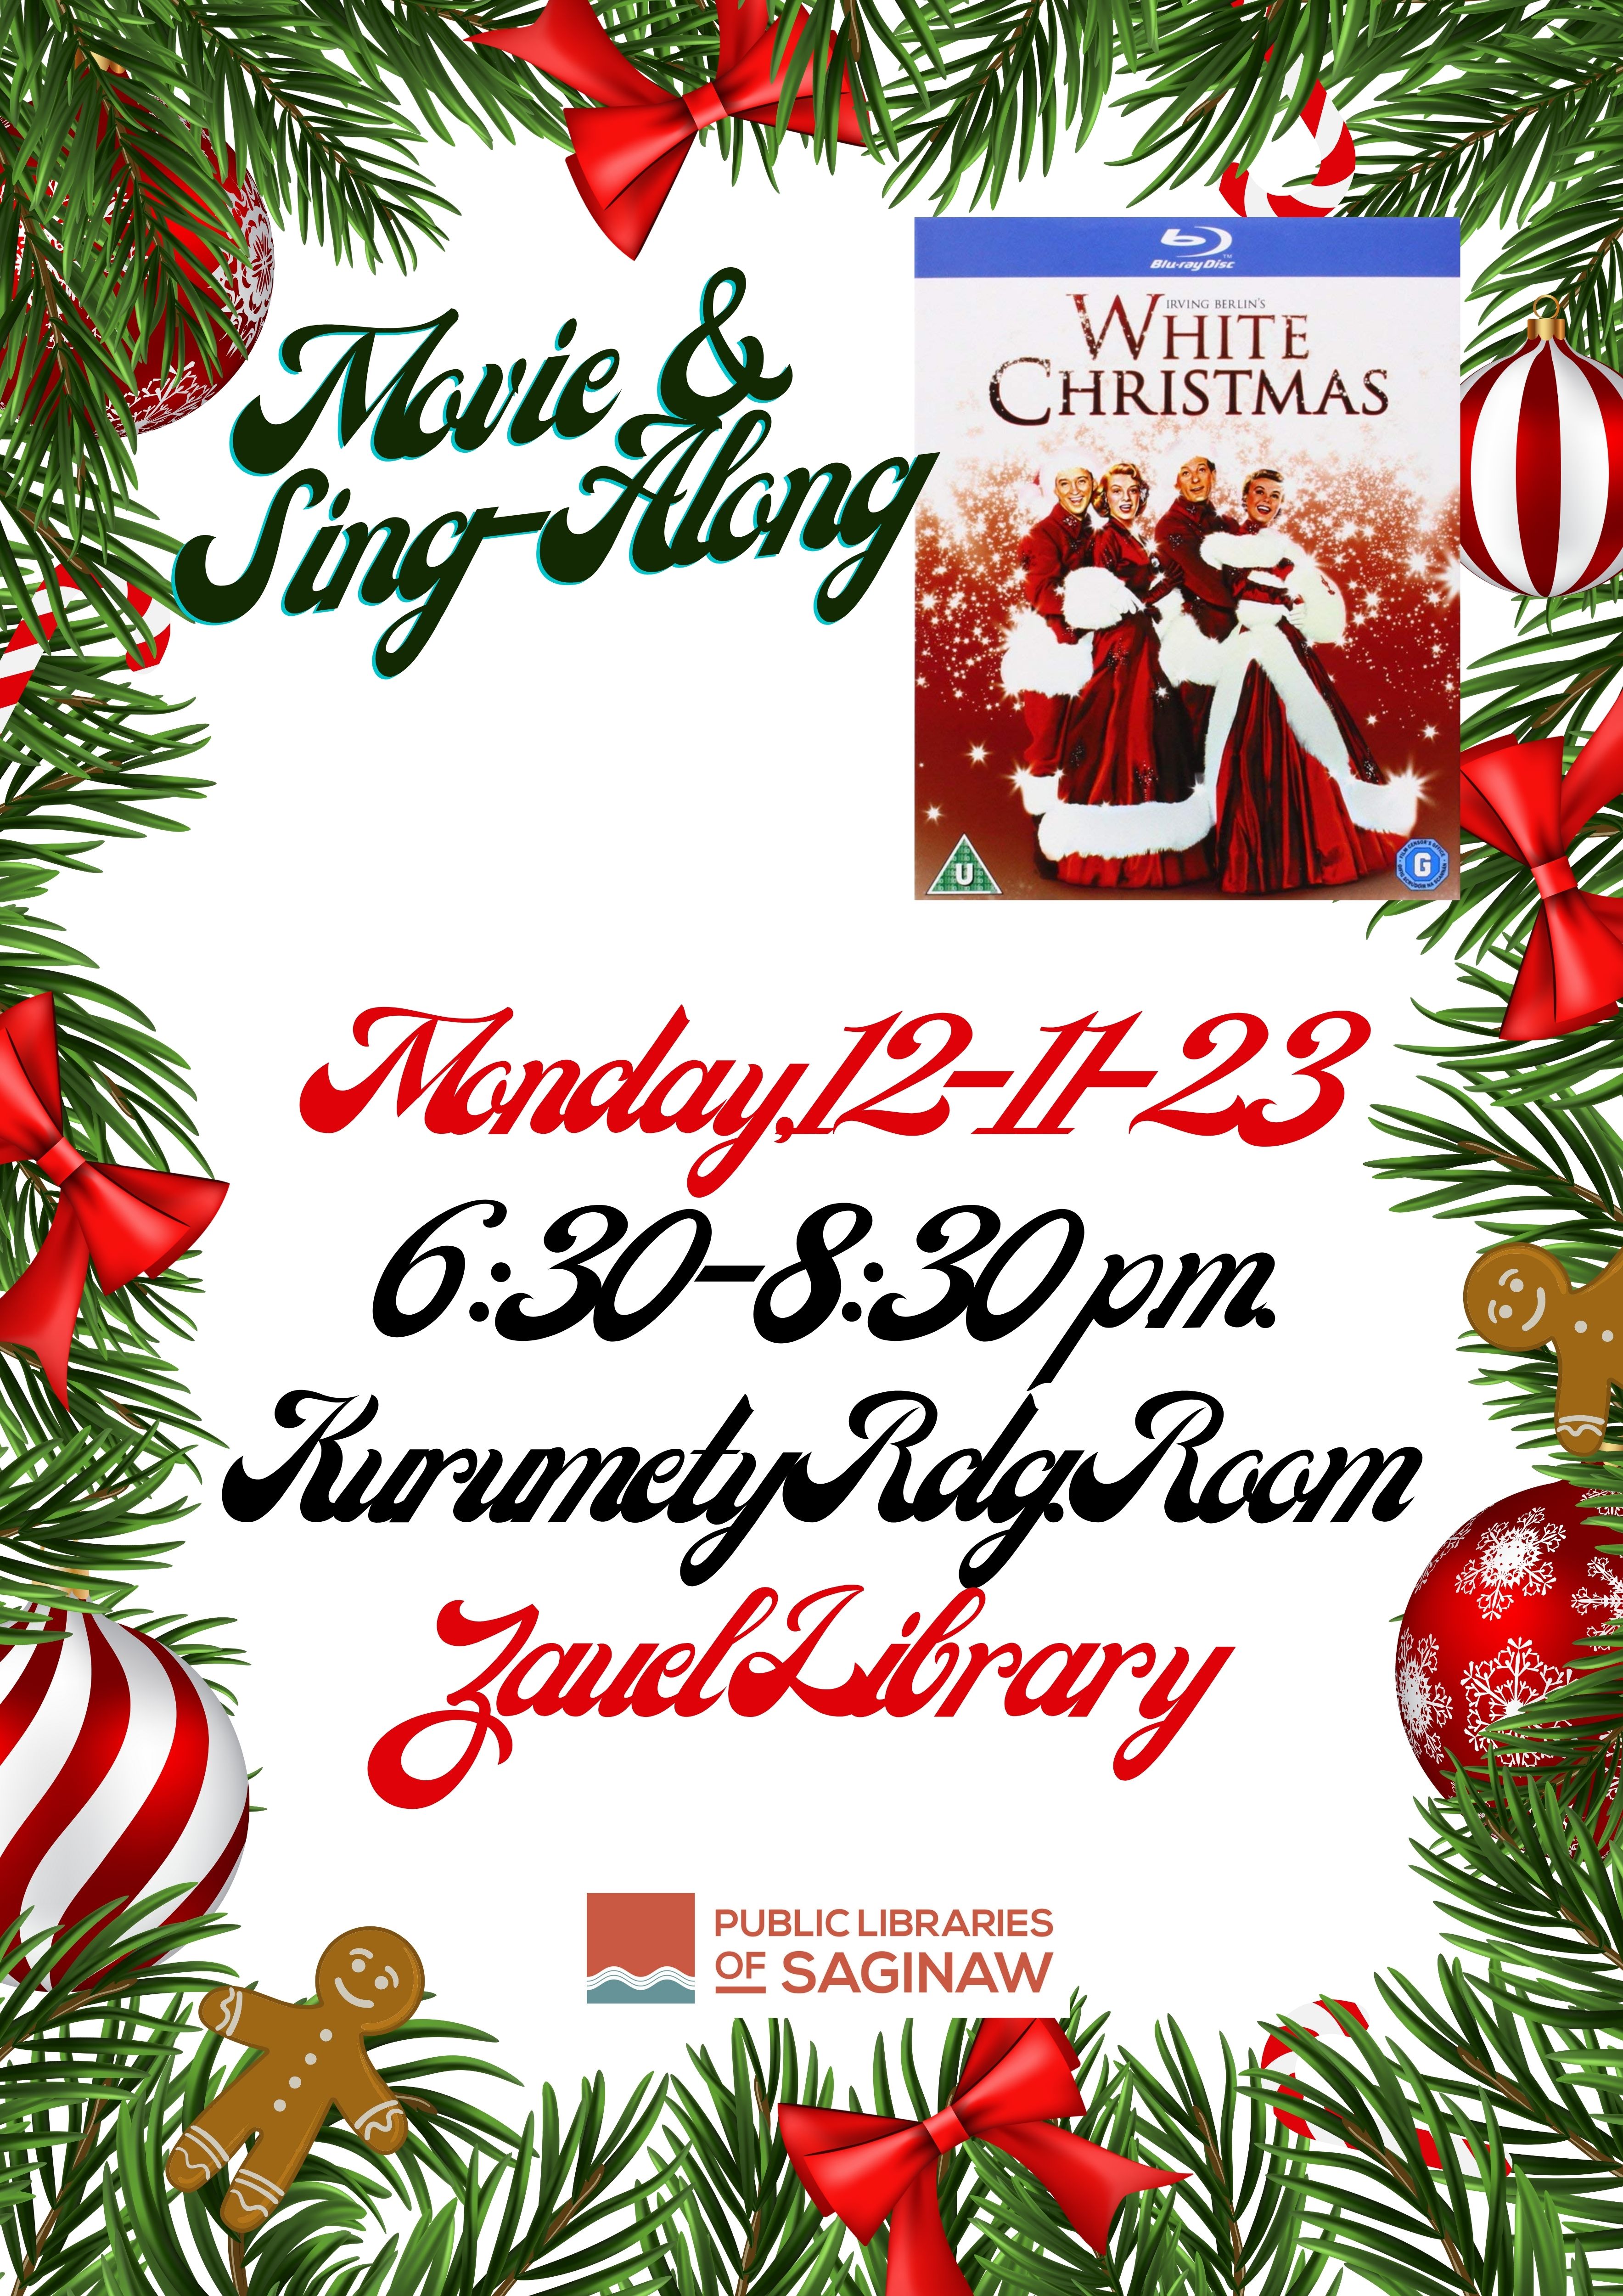 White Christmas Movie & Sing-A-Long at Zauel Monday, December 11 at 6:30 p.m. flyer